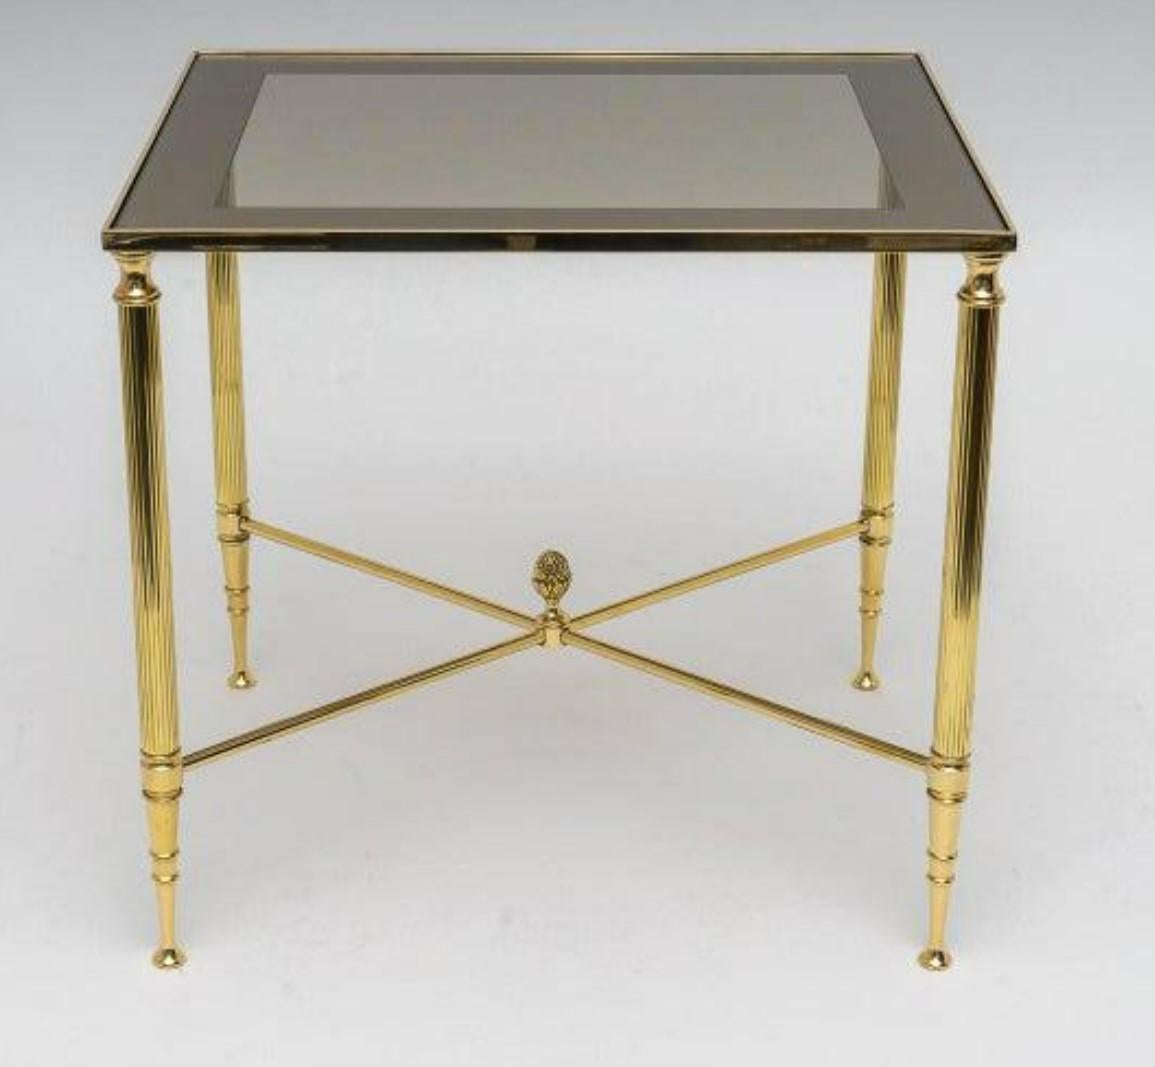 A beautiful set of three Hollywood Regency Nesting Tables attributed to Maison Jansen. All 3 are structurally sound and sturdy. Features fluted brass legs, smoked glass with mirrored edges (1.5